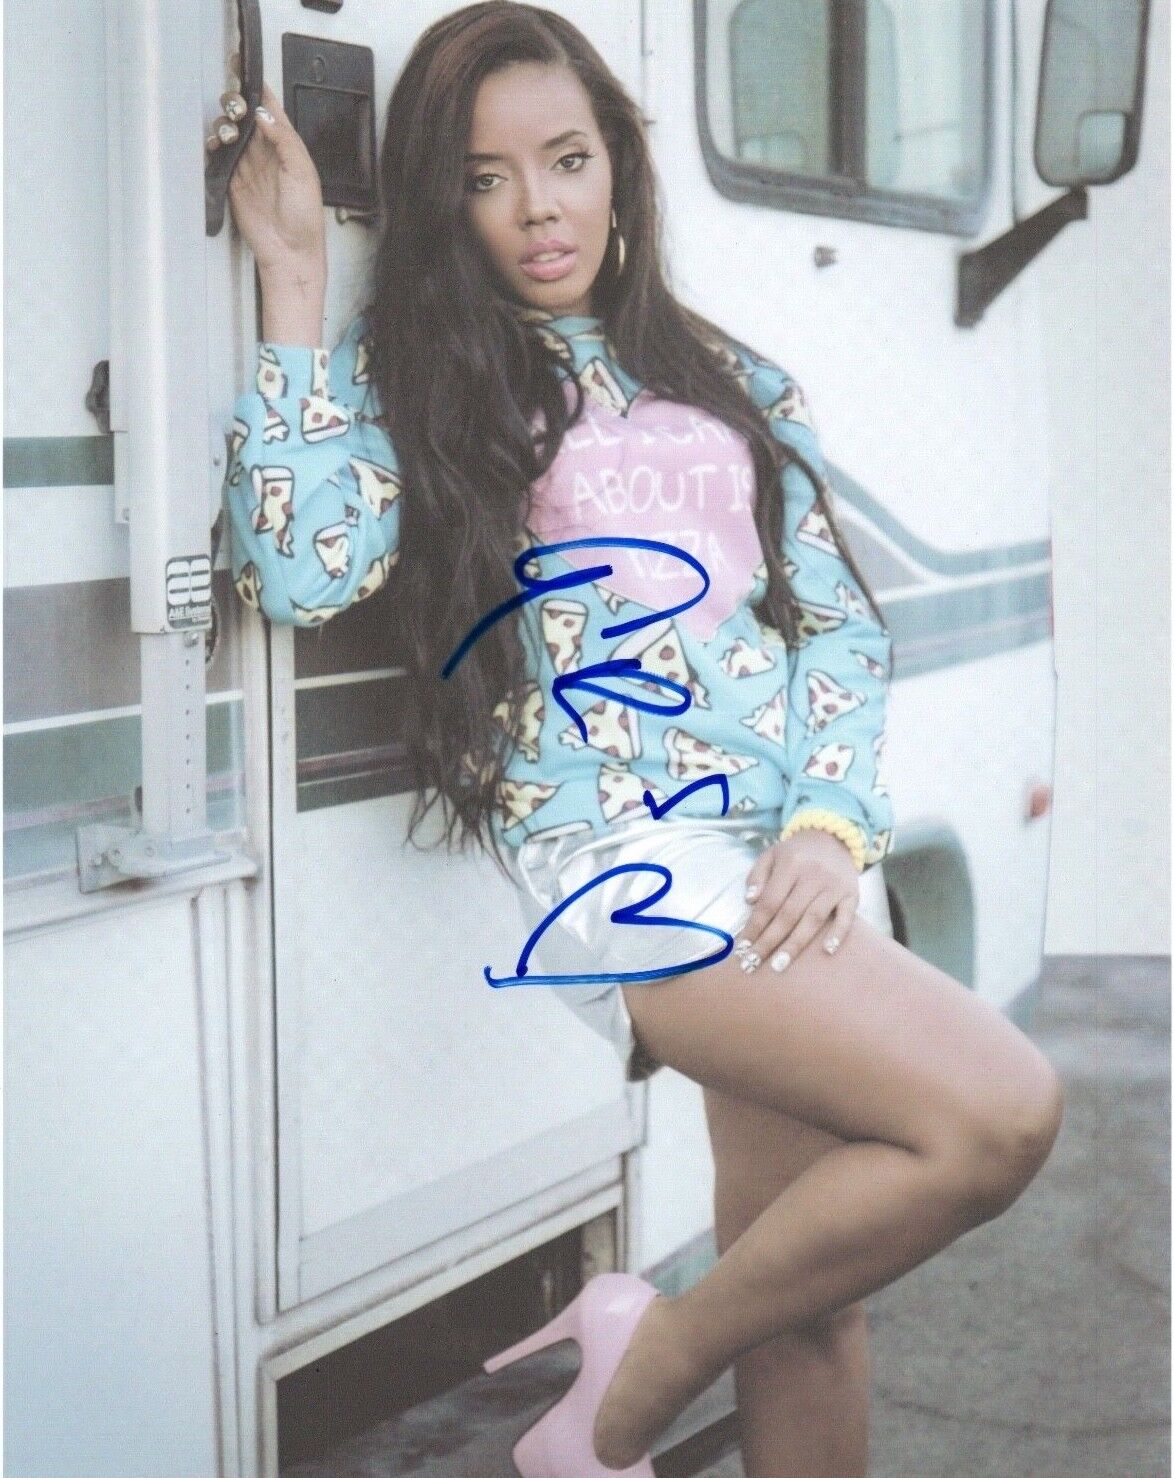 Angela Simmons Signed Autographed 8x10 Photo Poster painting Run's House Designer COA VD